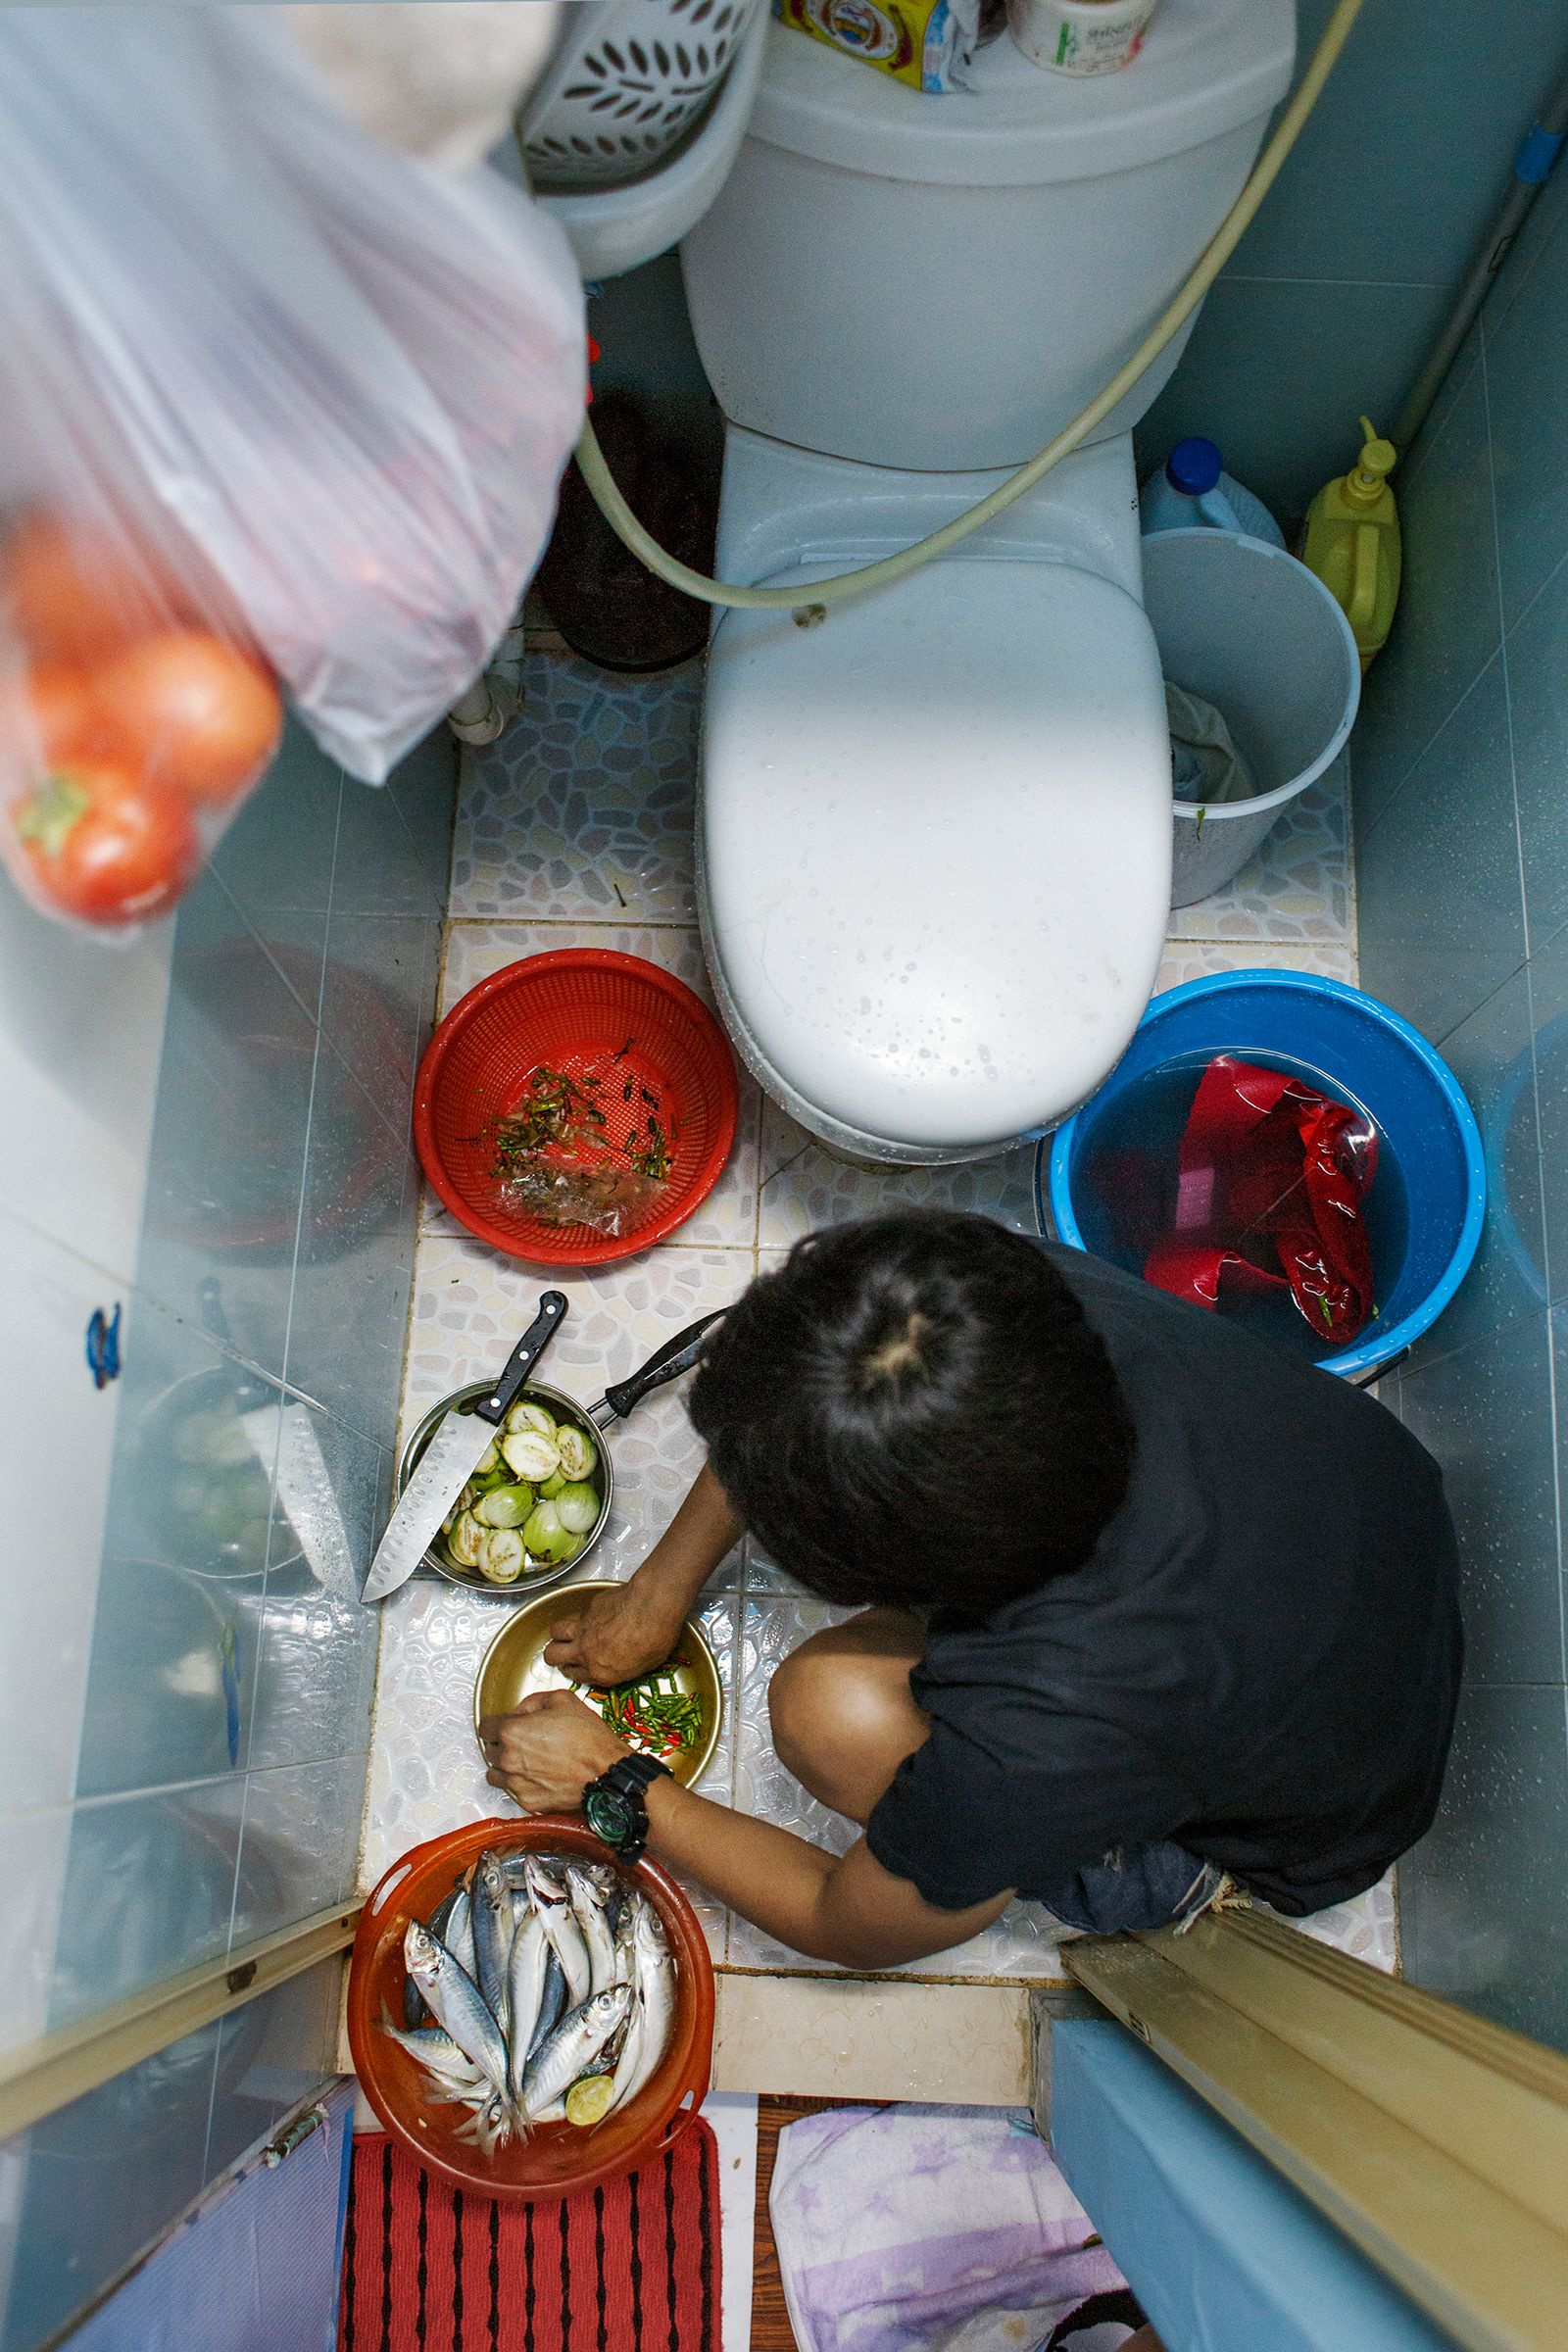 © Rebecca Sampson - Preparing dinner in the toilet/kitchen - 5sqm apartment shared by 2 housemaids in Hong Kong